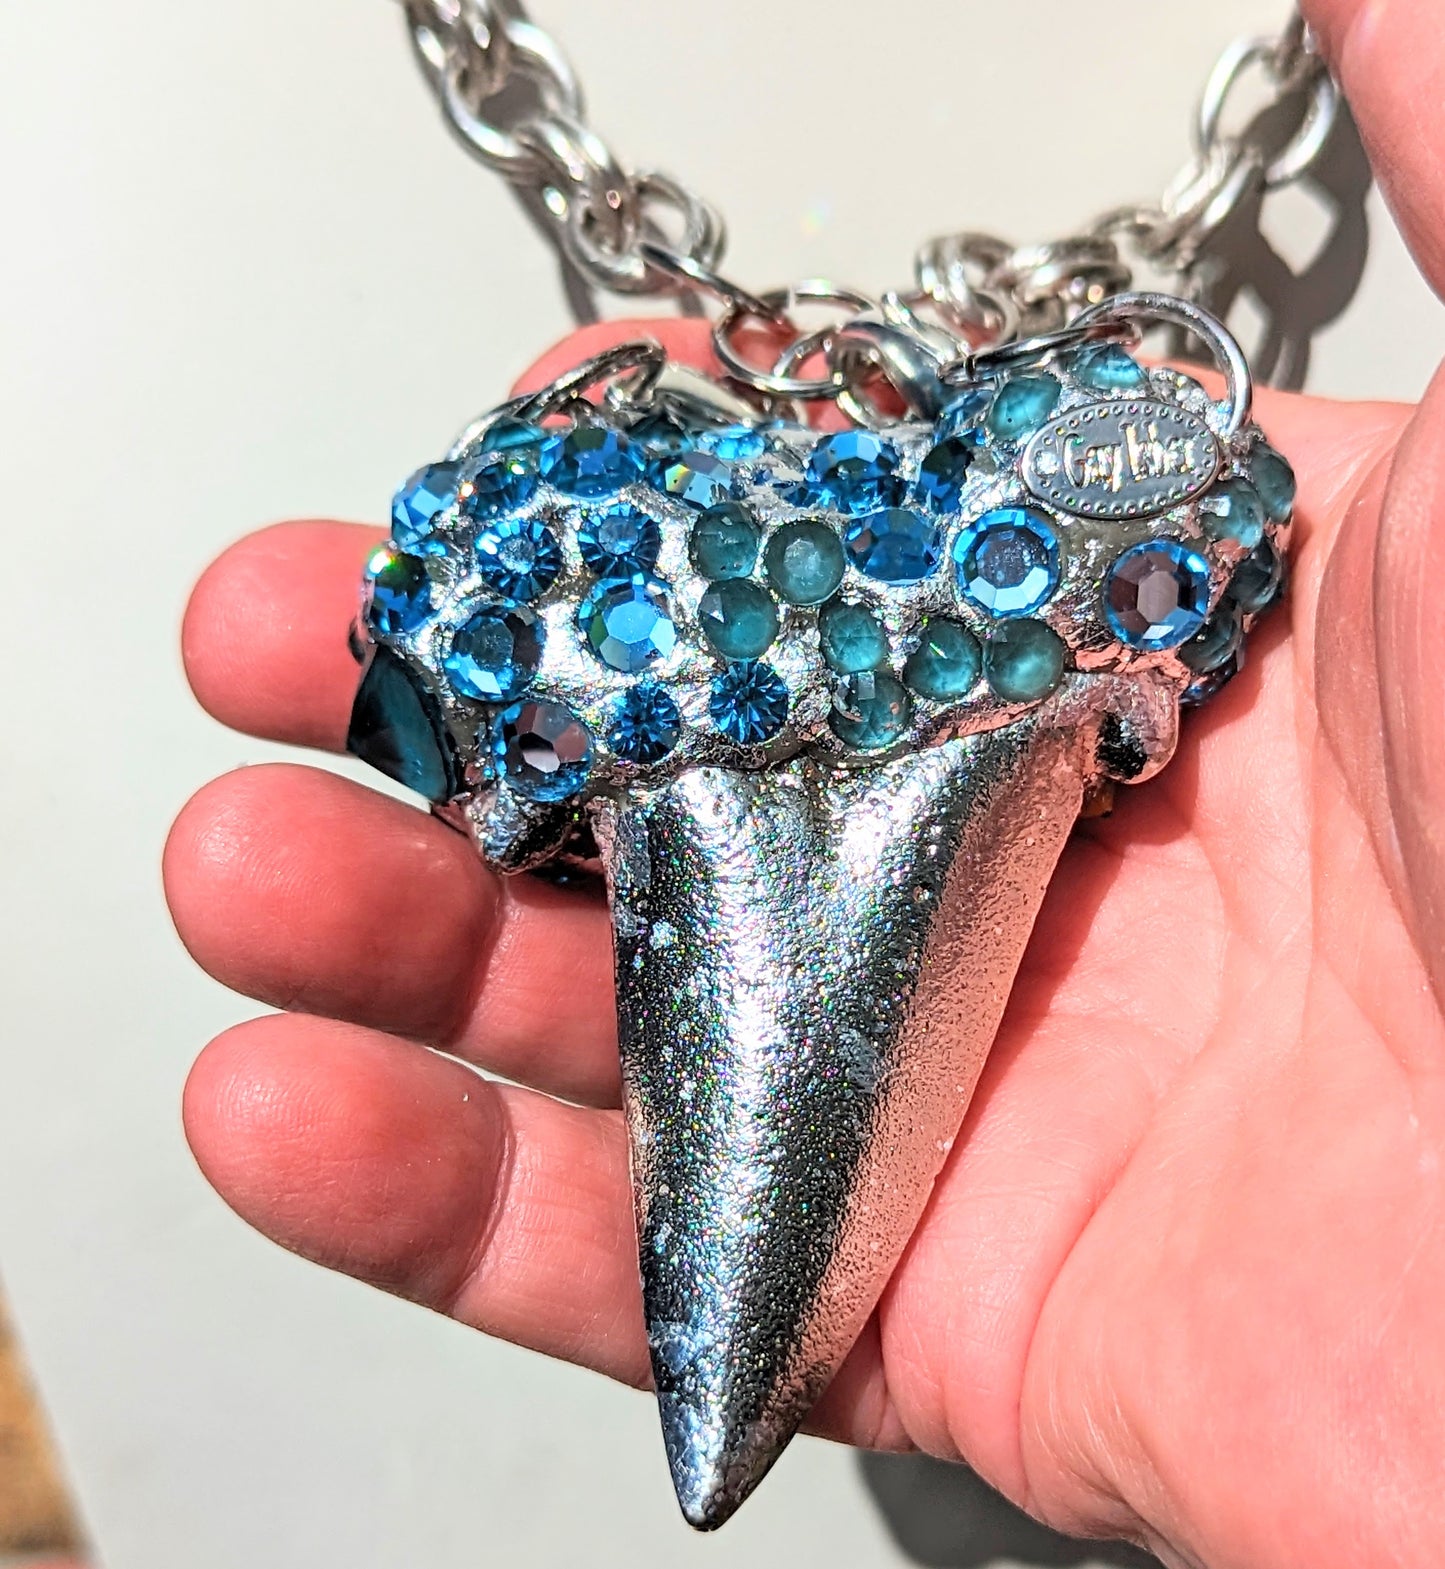 2 in 1 Necklaces 1. Shark Tooth Fossil Pendant and 2. Orchids Chromed Plated Aqua Swarovski Beach Wedding Statement Sugar Gay Isbeer